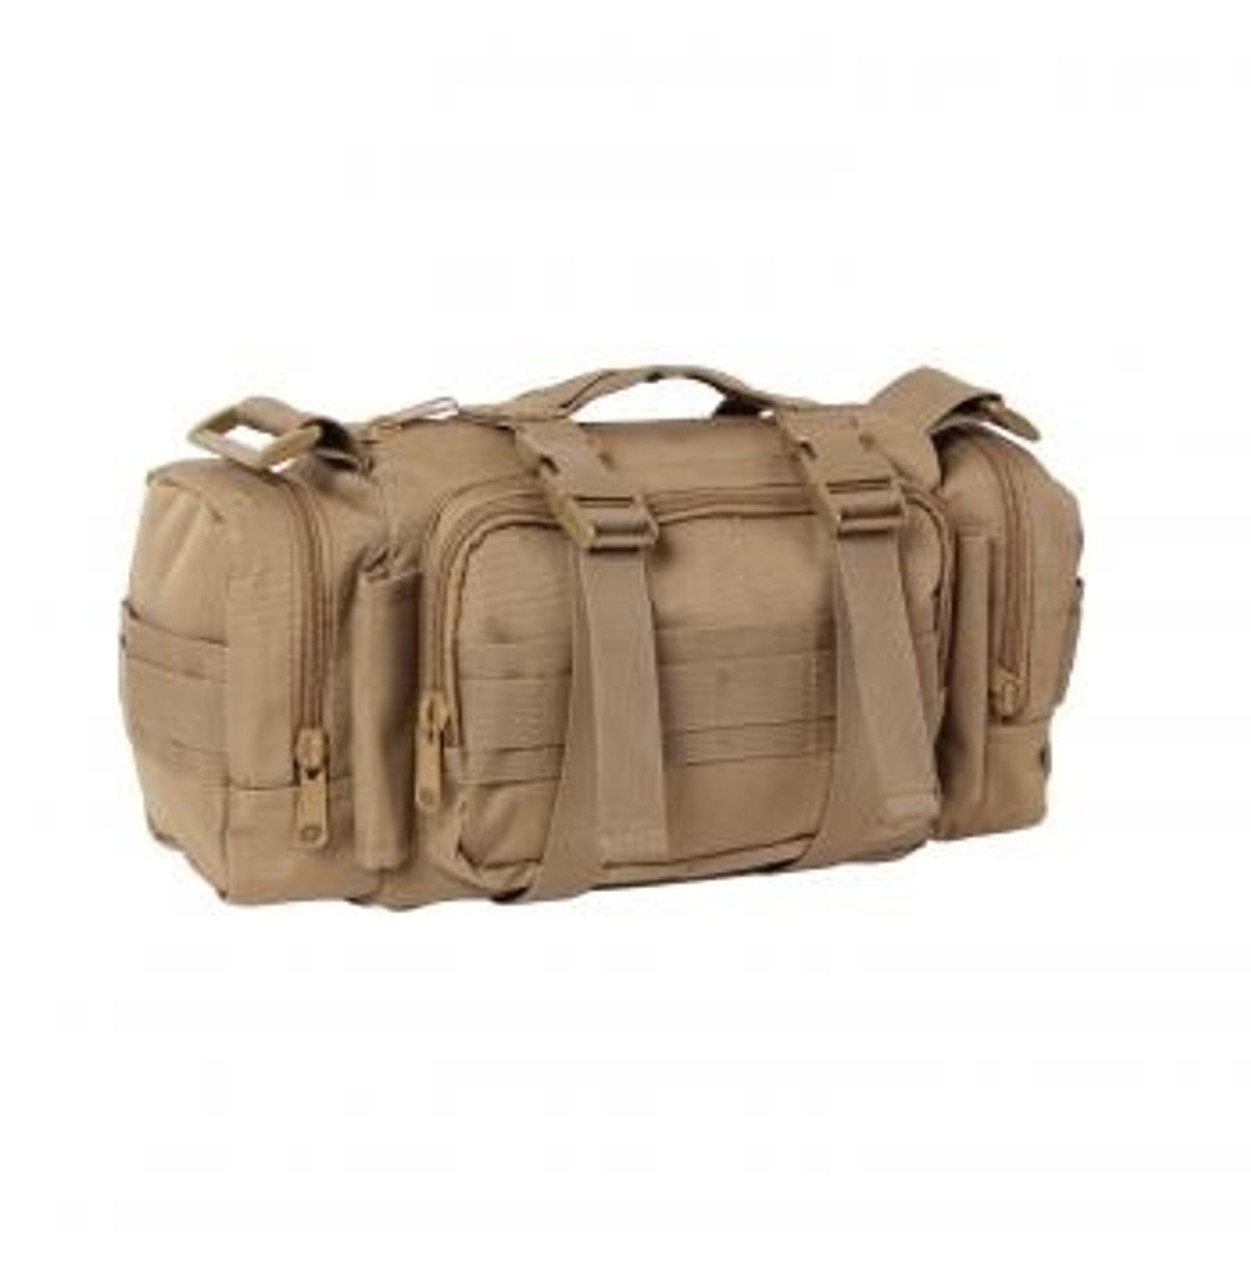 Tactical Convertipack from Hessen Antique